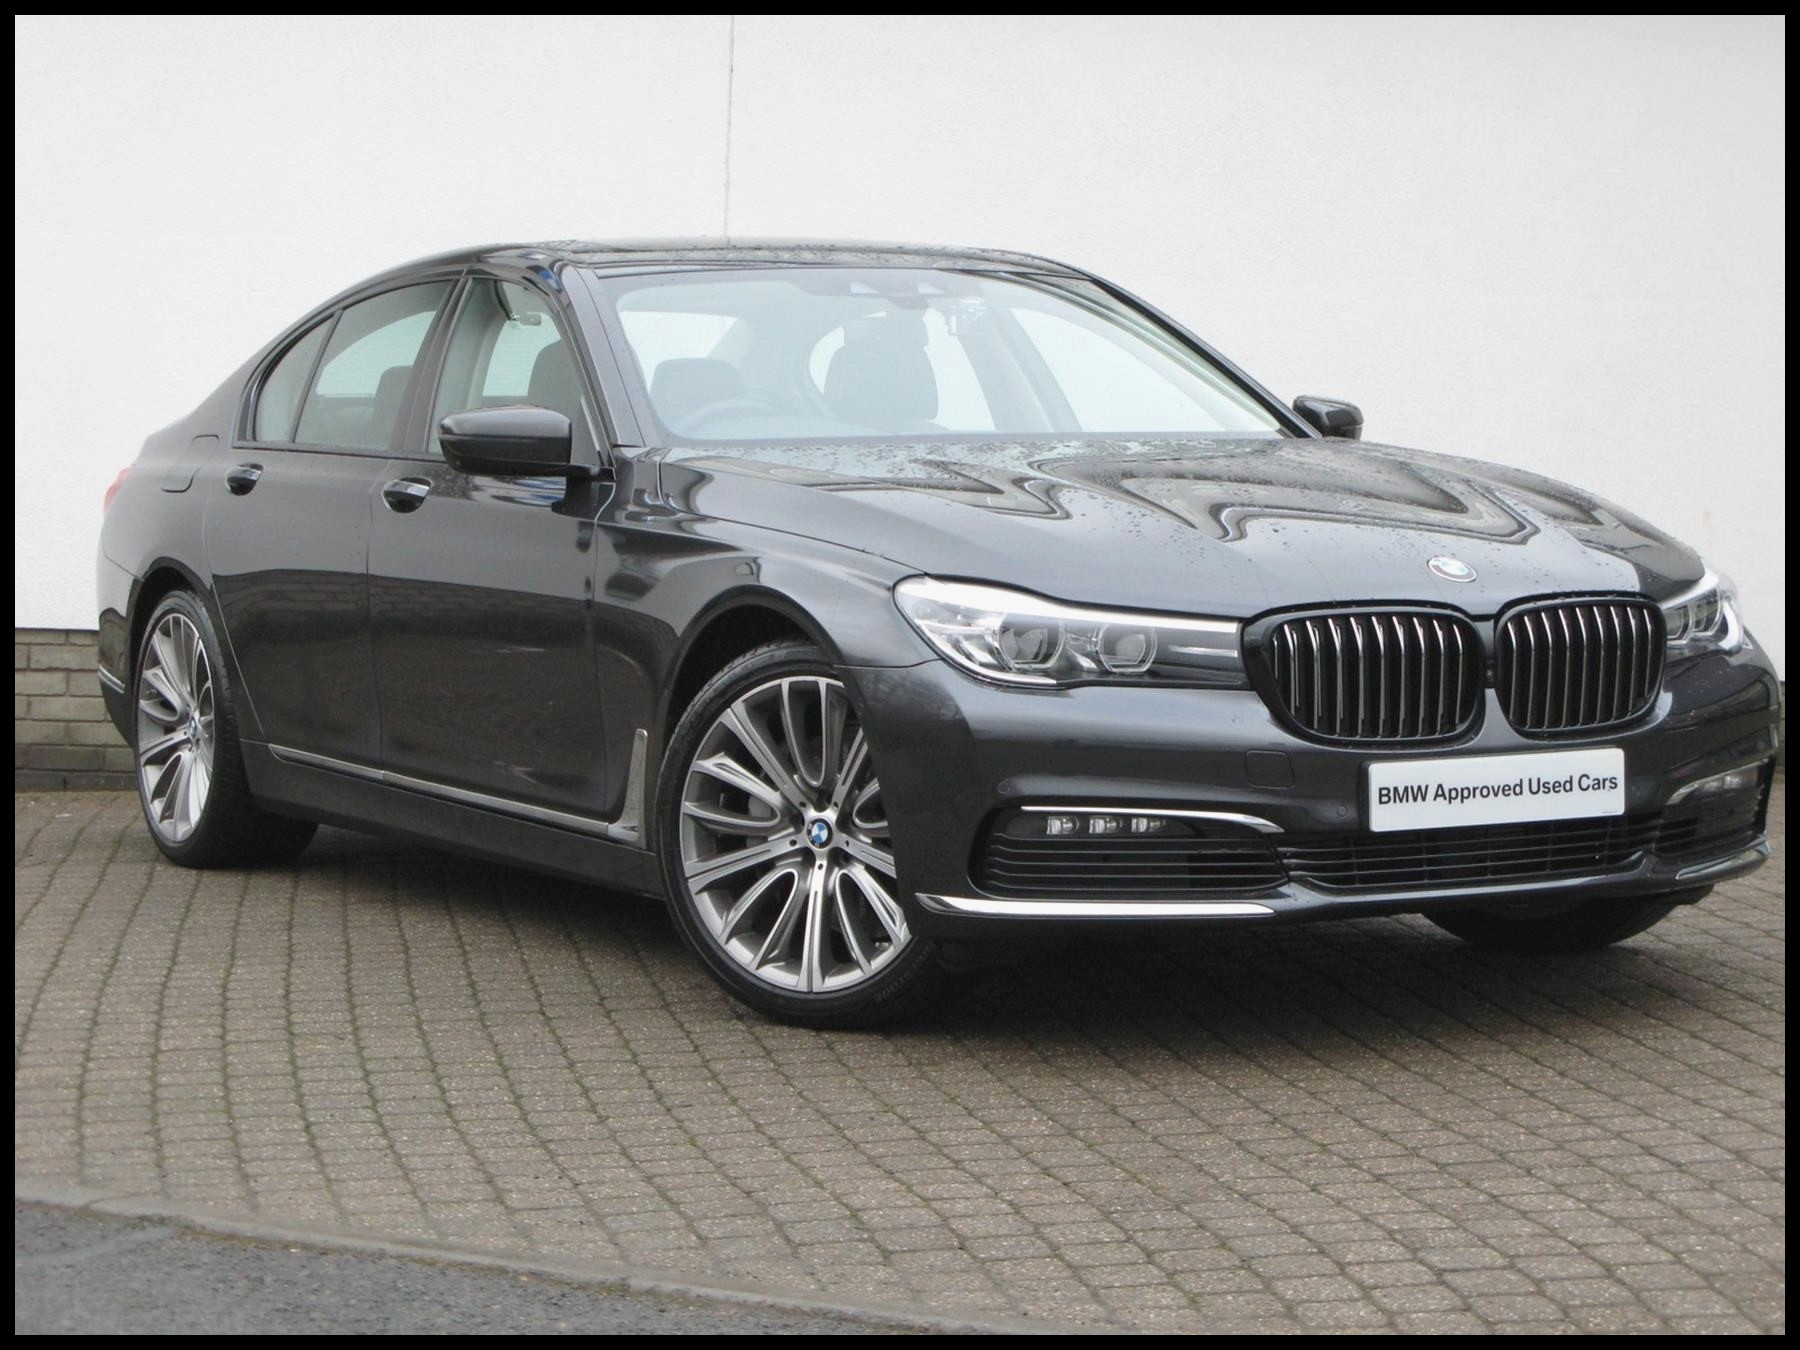 Used Bmw Okc Lovely Bmw 7 Series for Sale Awesome Used 2017 Bmw 7 Series G11